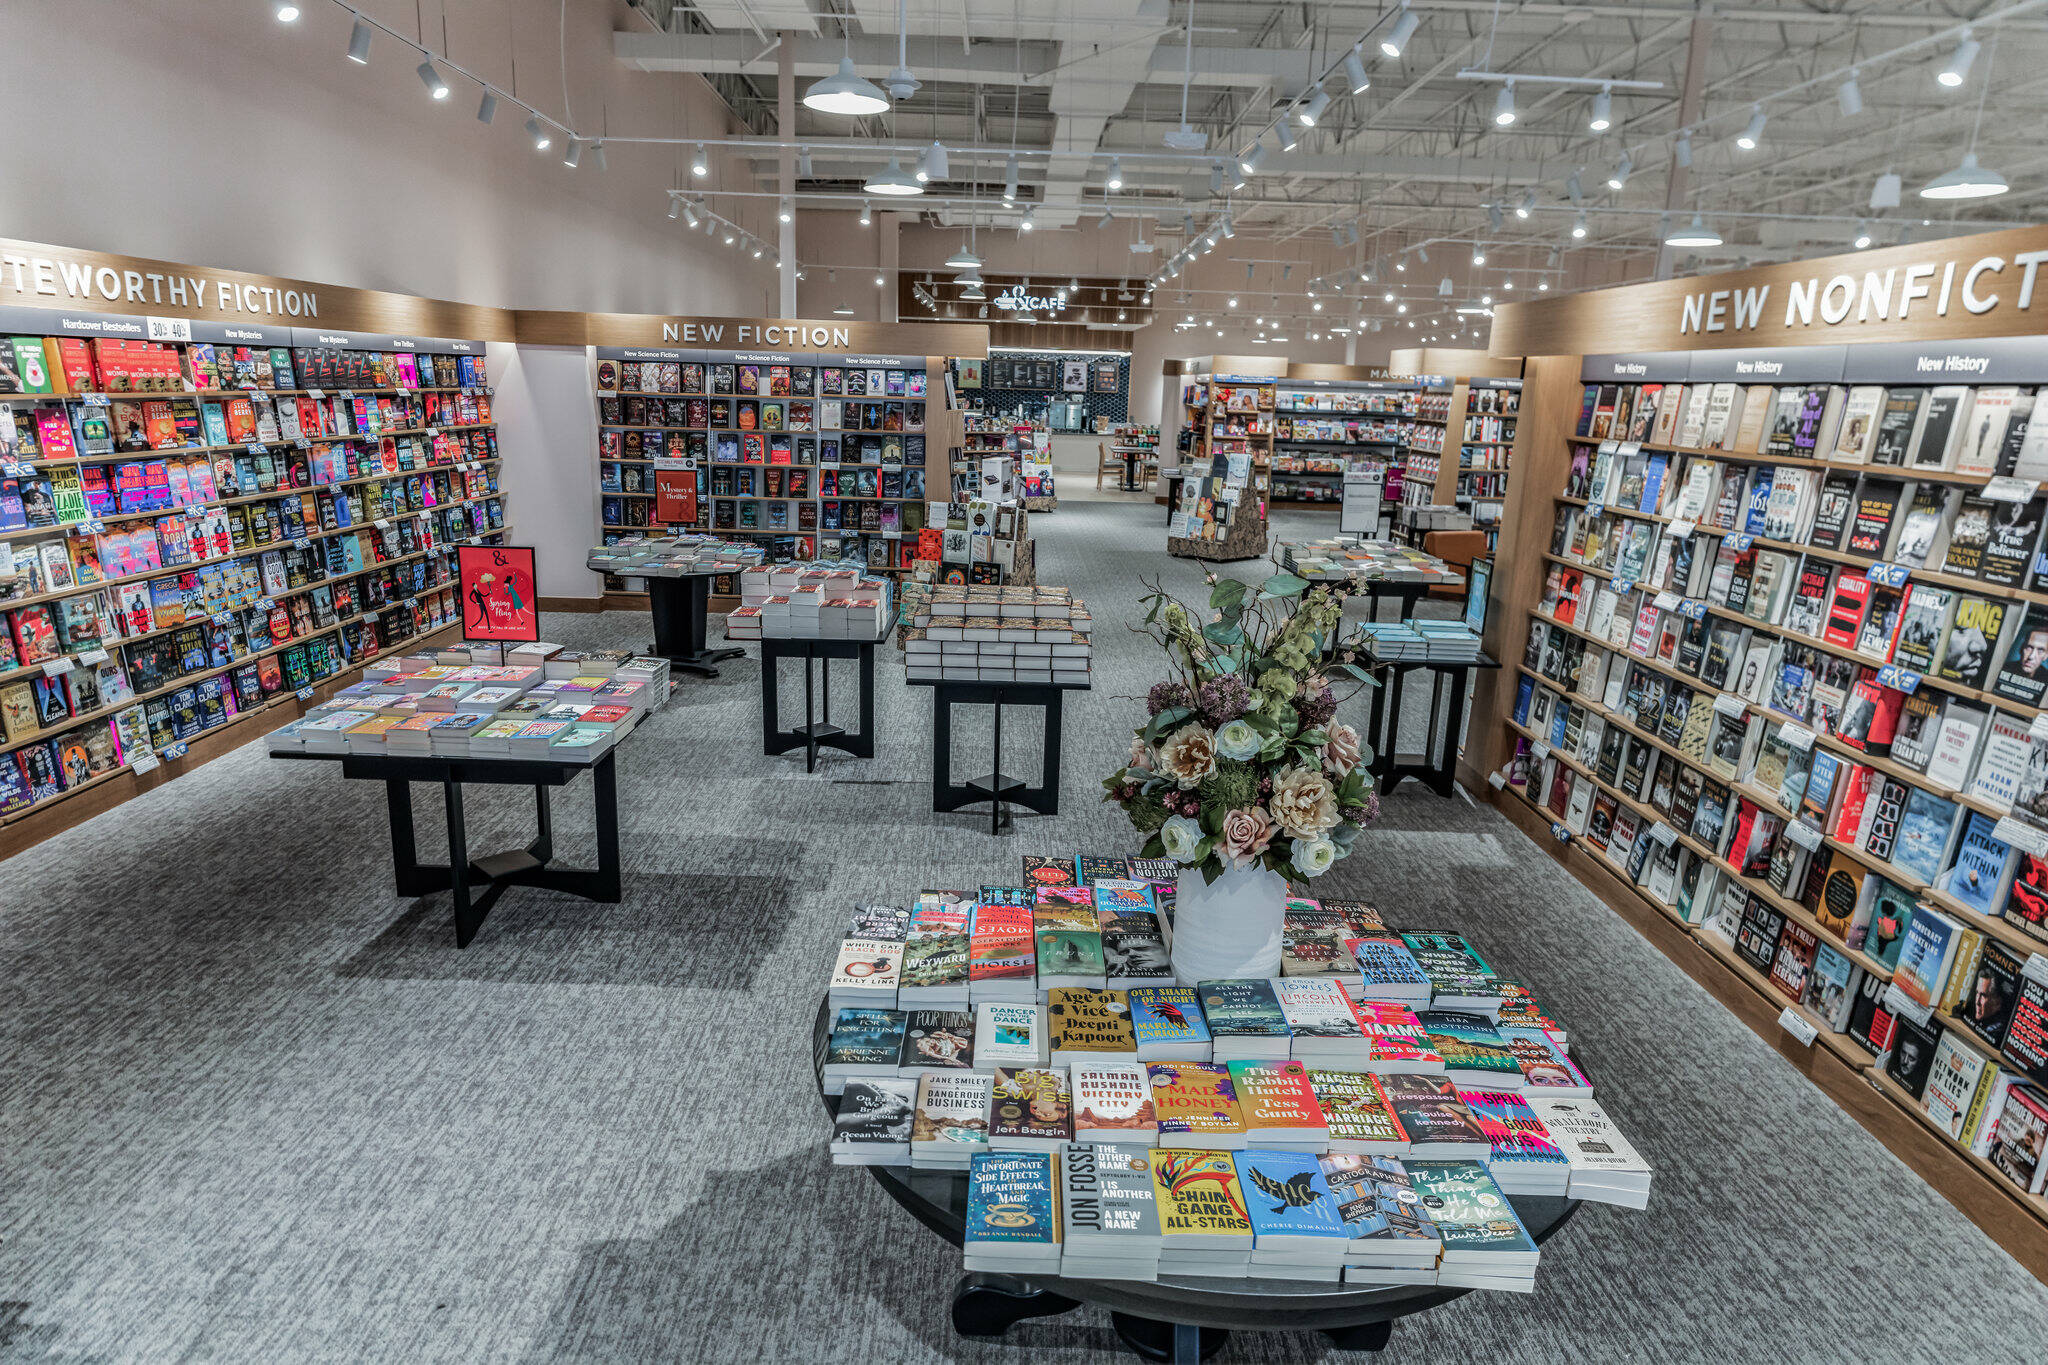 The updated Barnes & Noble, located in American Fork, Utah, brings an idea of what the Issaquah location will look like in style and size. (Photo courtesy of Barnes & Noble)